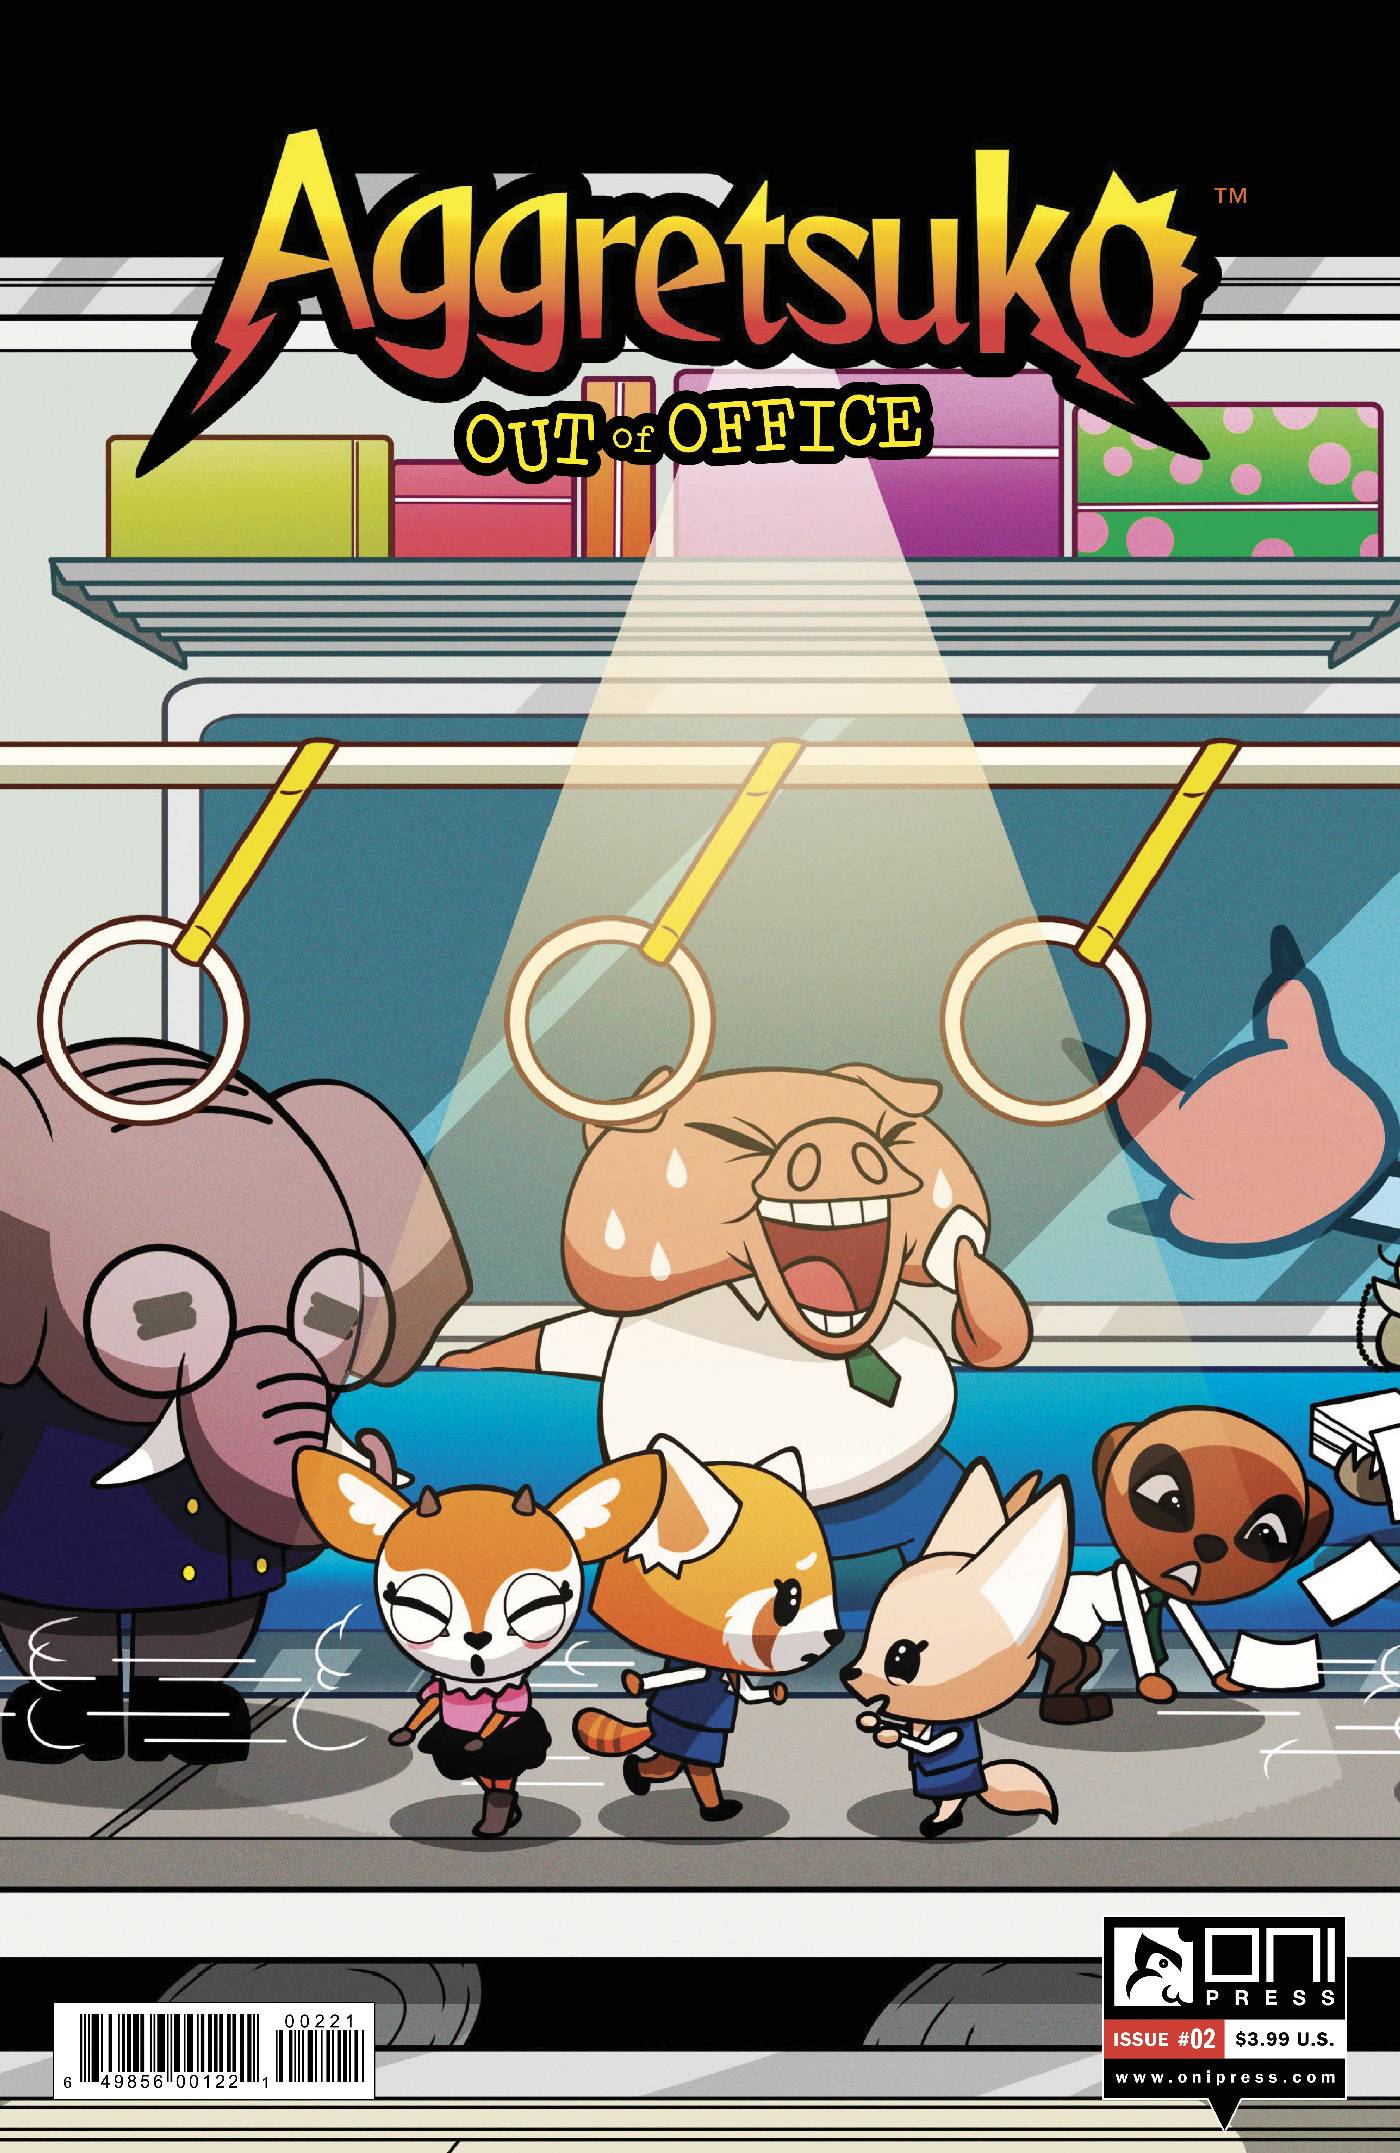 AGGRETSUKO OUT OF OFFICE